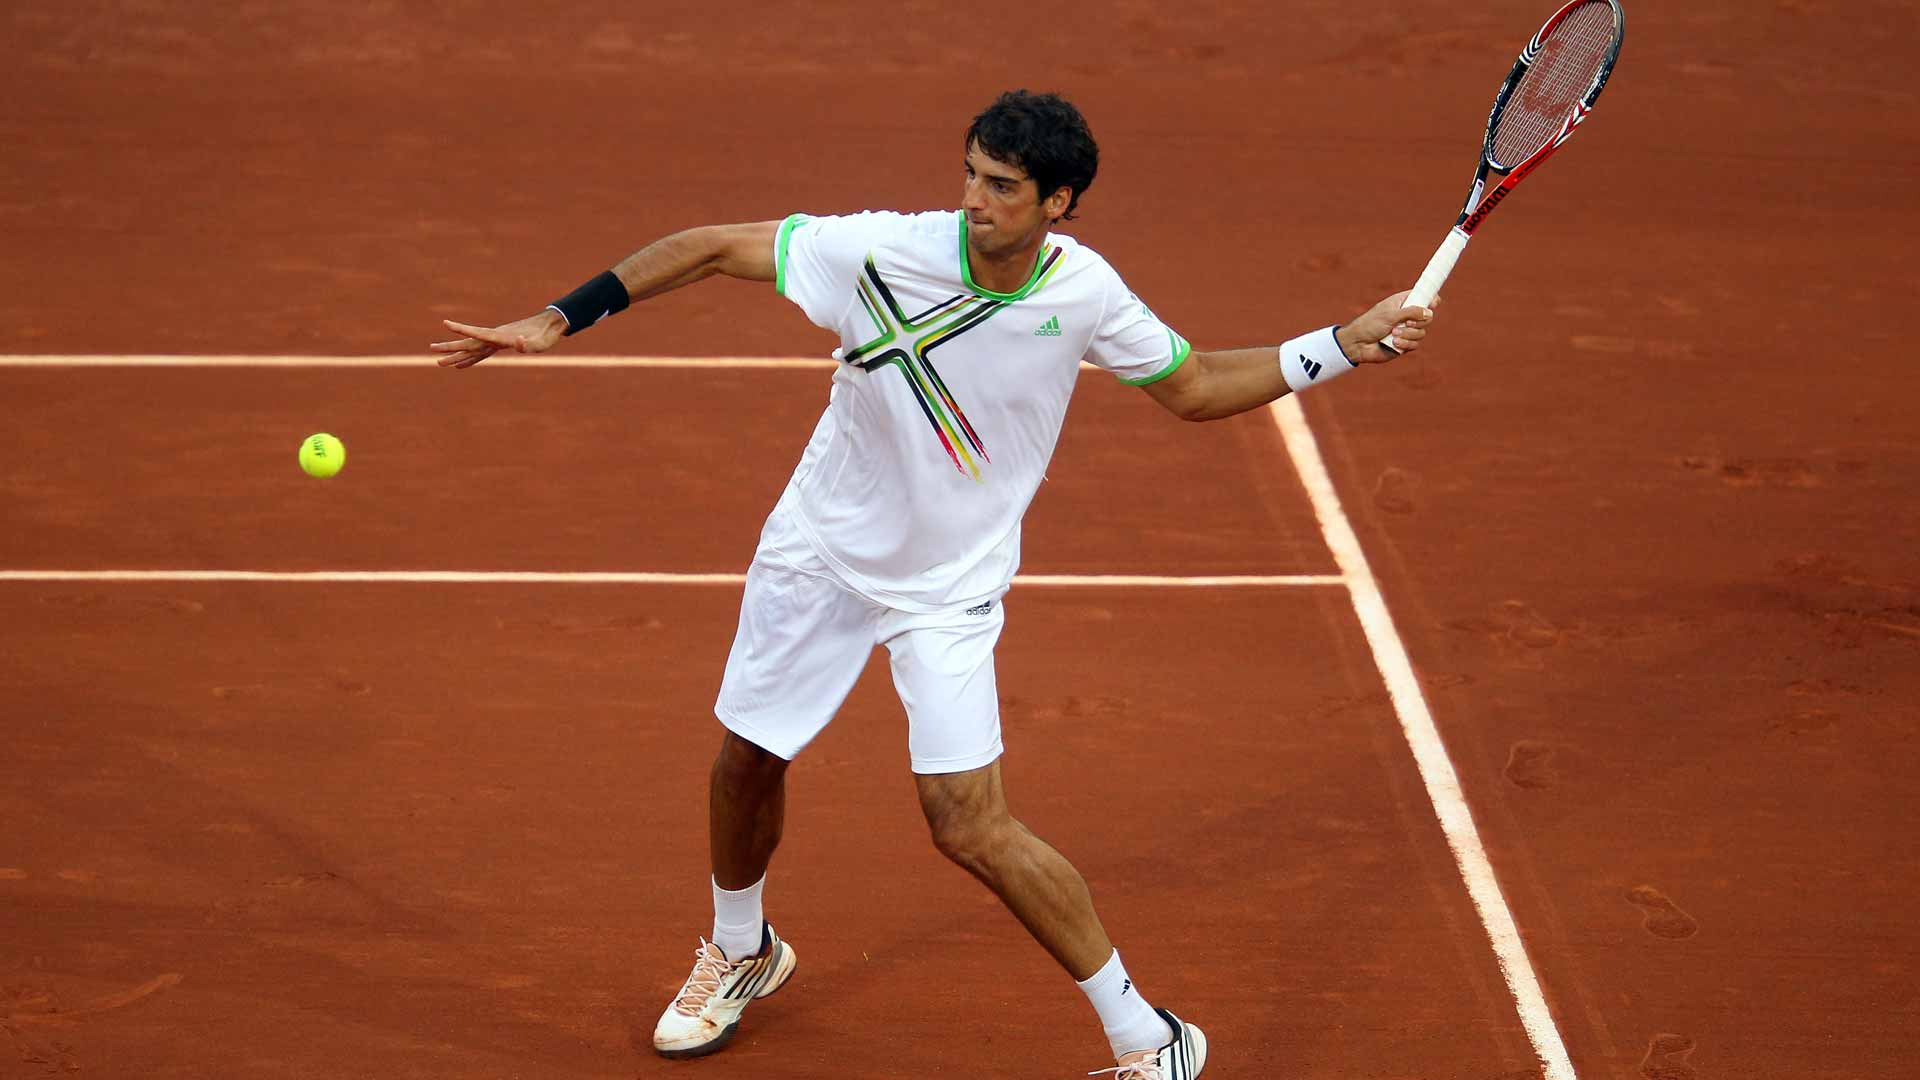 <a href='https://www.atptour.com/en/players/thomaz-bellucci/bd20/overview'>Thomaz Bellucci</a> at the 2011 <a href='https://www.atptour.com/en/tournaments/madrid/1536/overview'>Mutua Madrid Open</a>, where he was a semi-finalist.